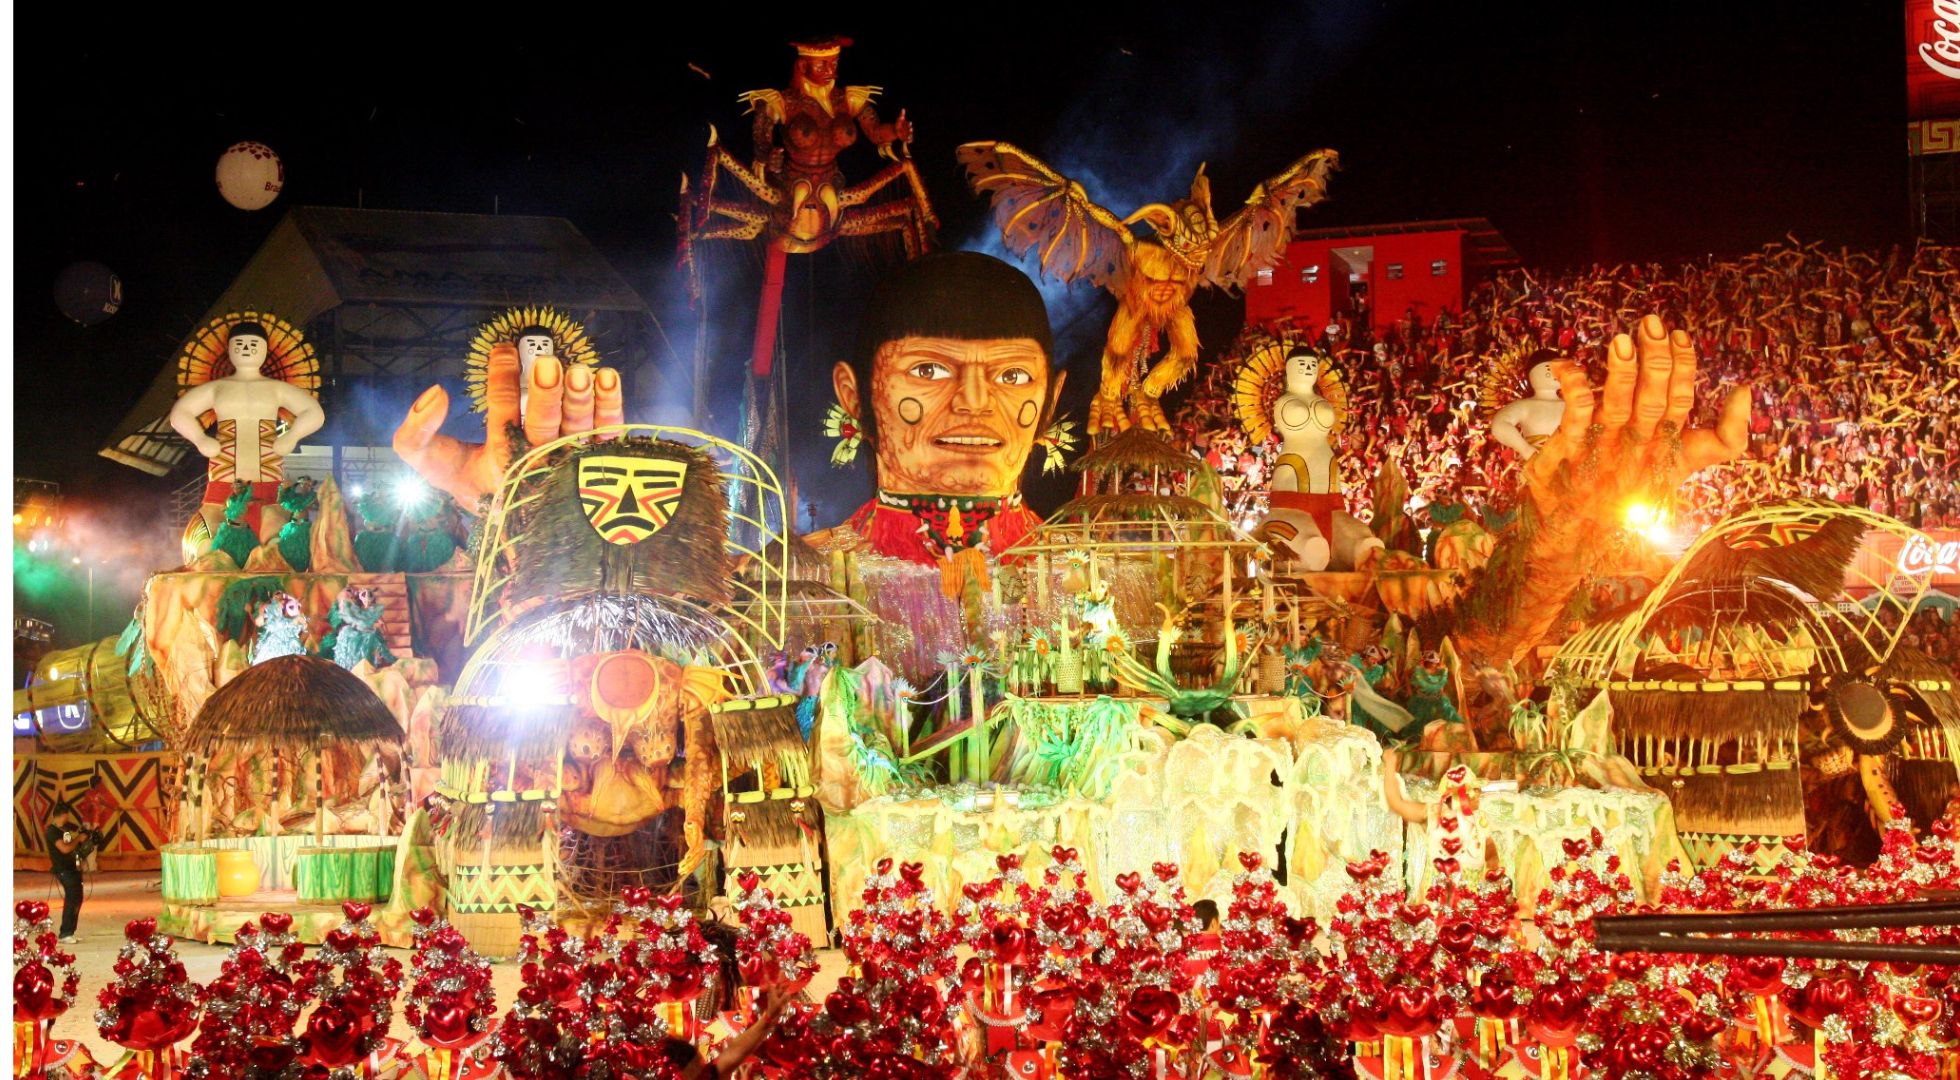 The Rio Carnival is full of colour, music and samba